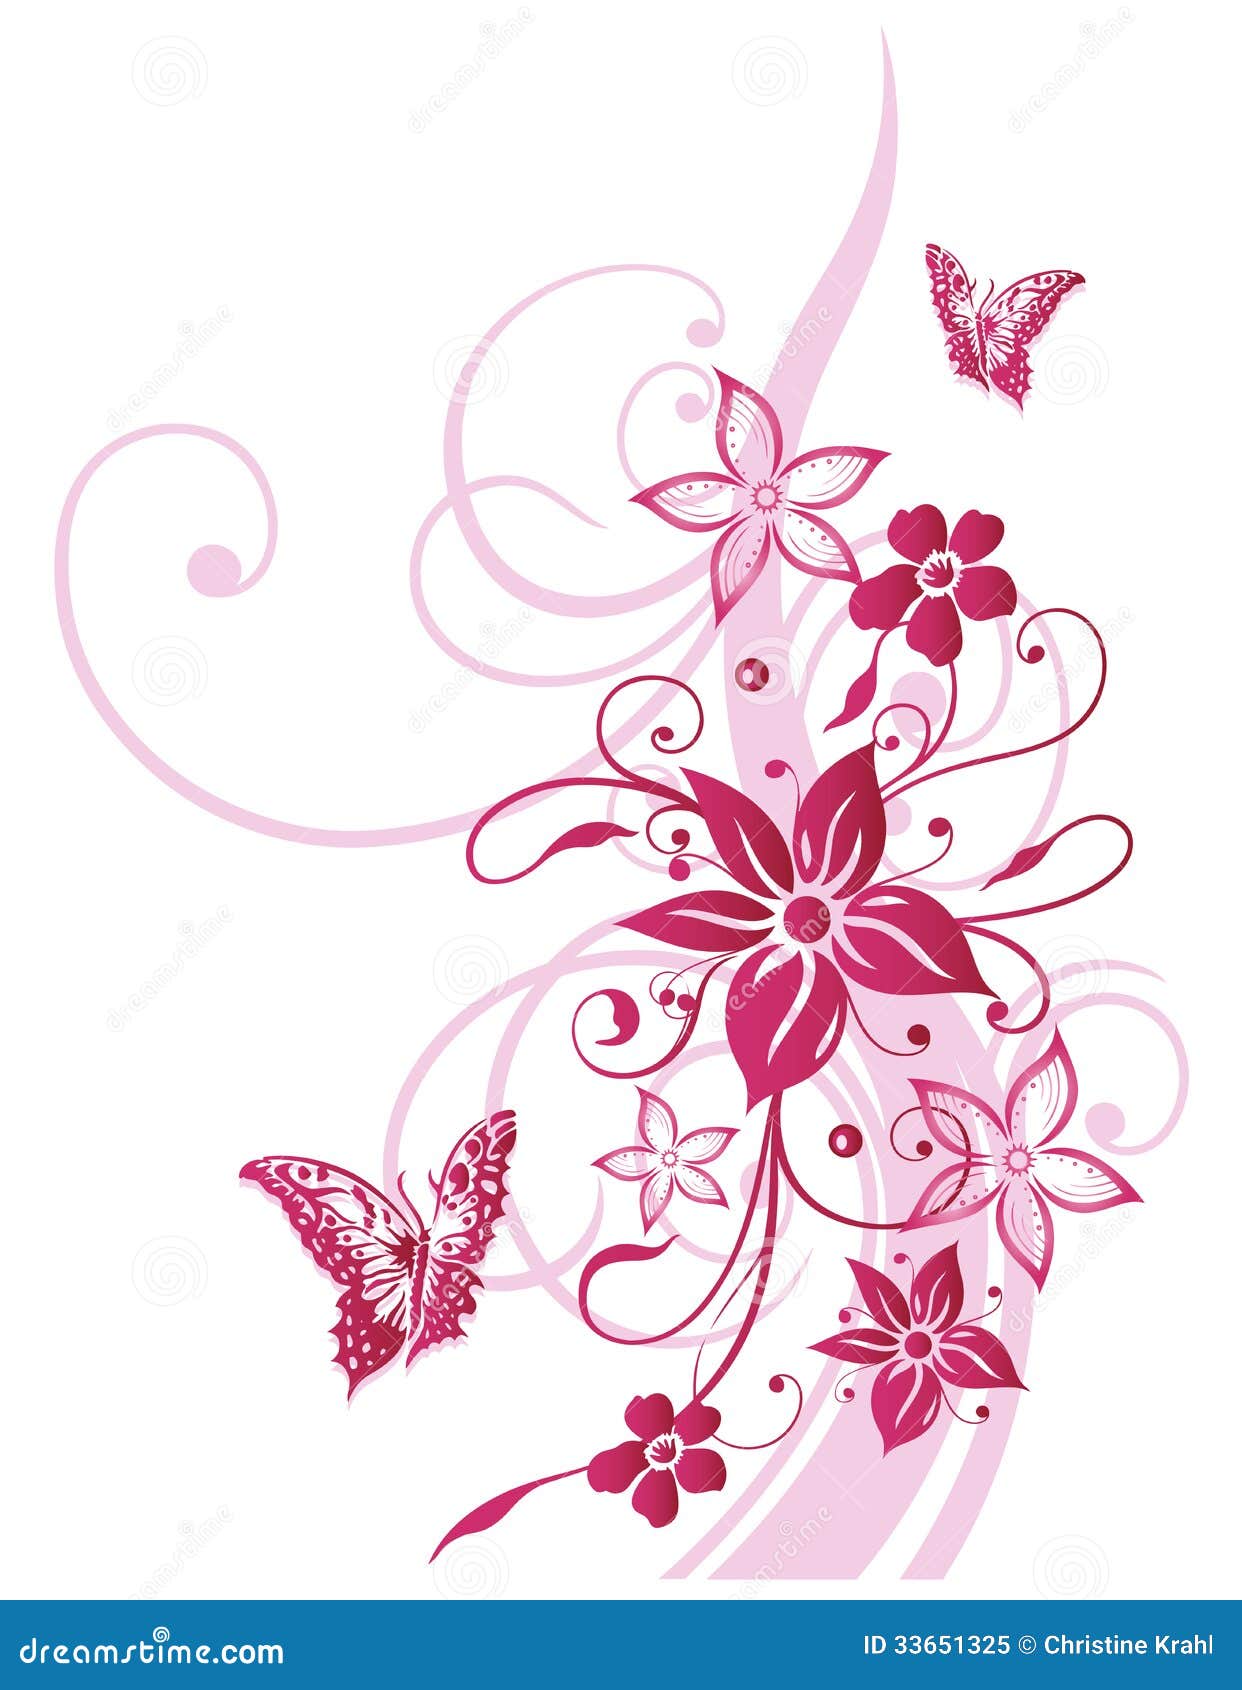 Flowers, Butterfly, Summer, Pink Royalty Free Stock Photo - Image: 33651325